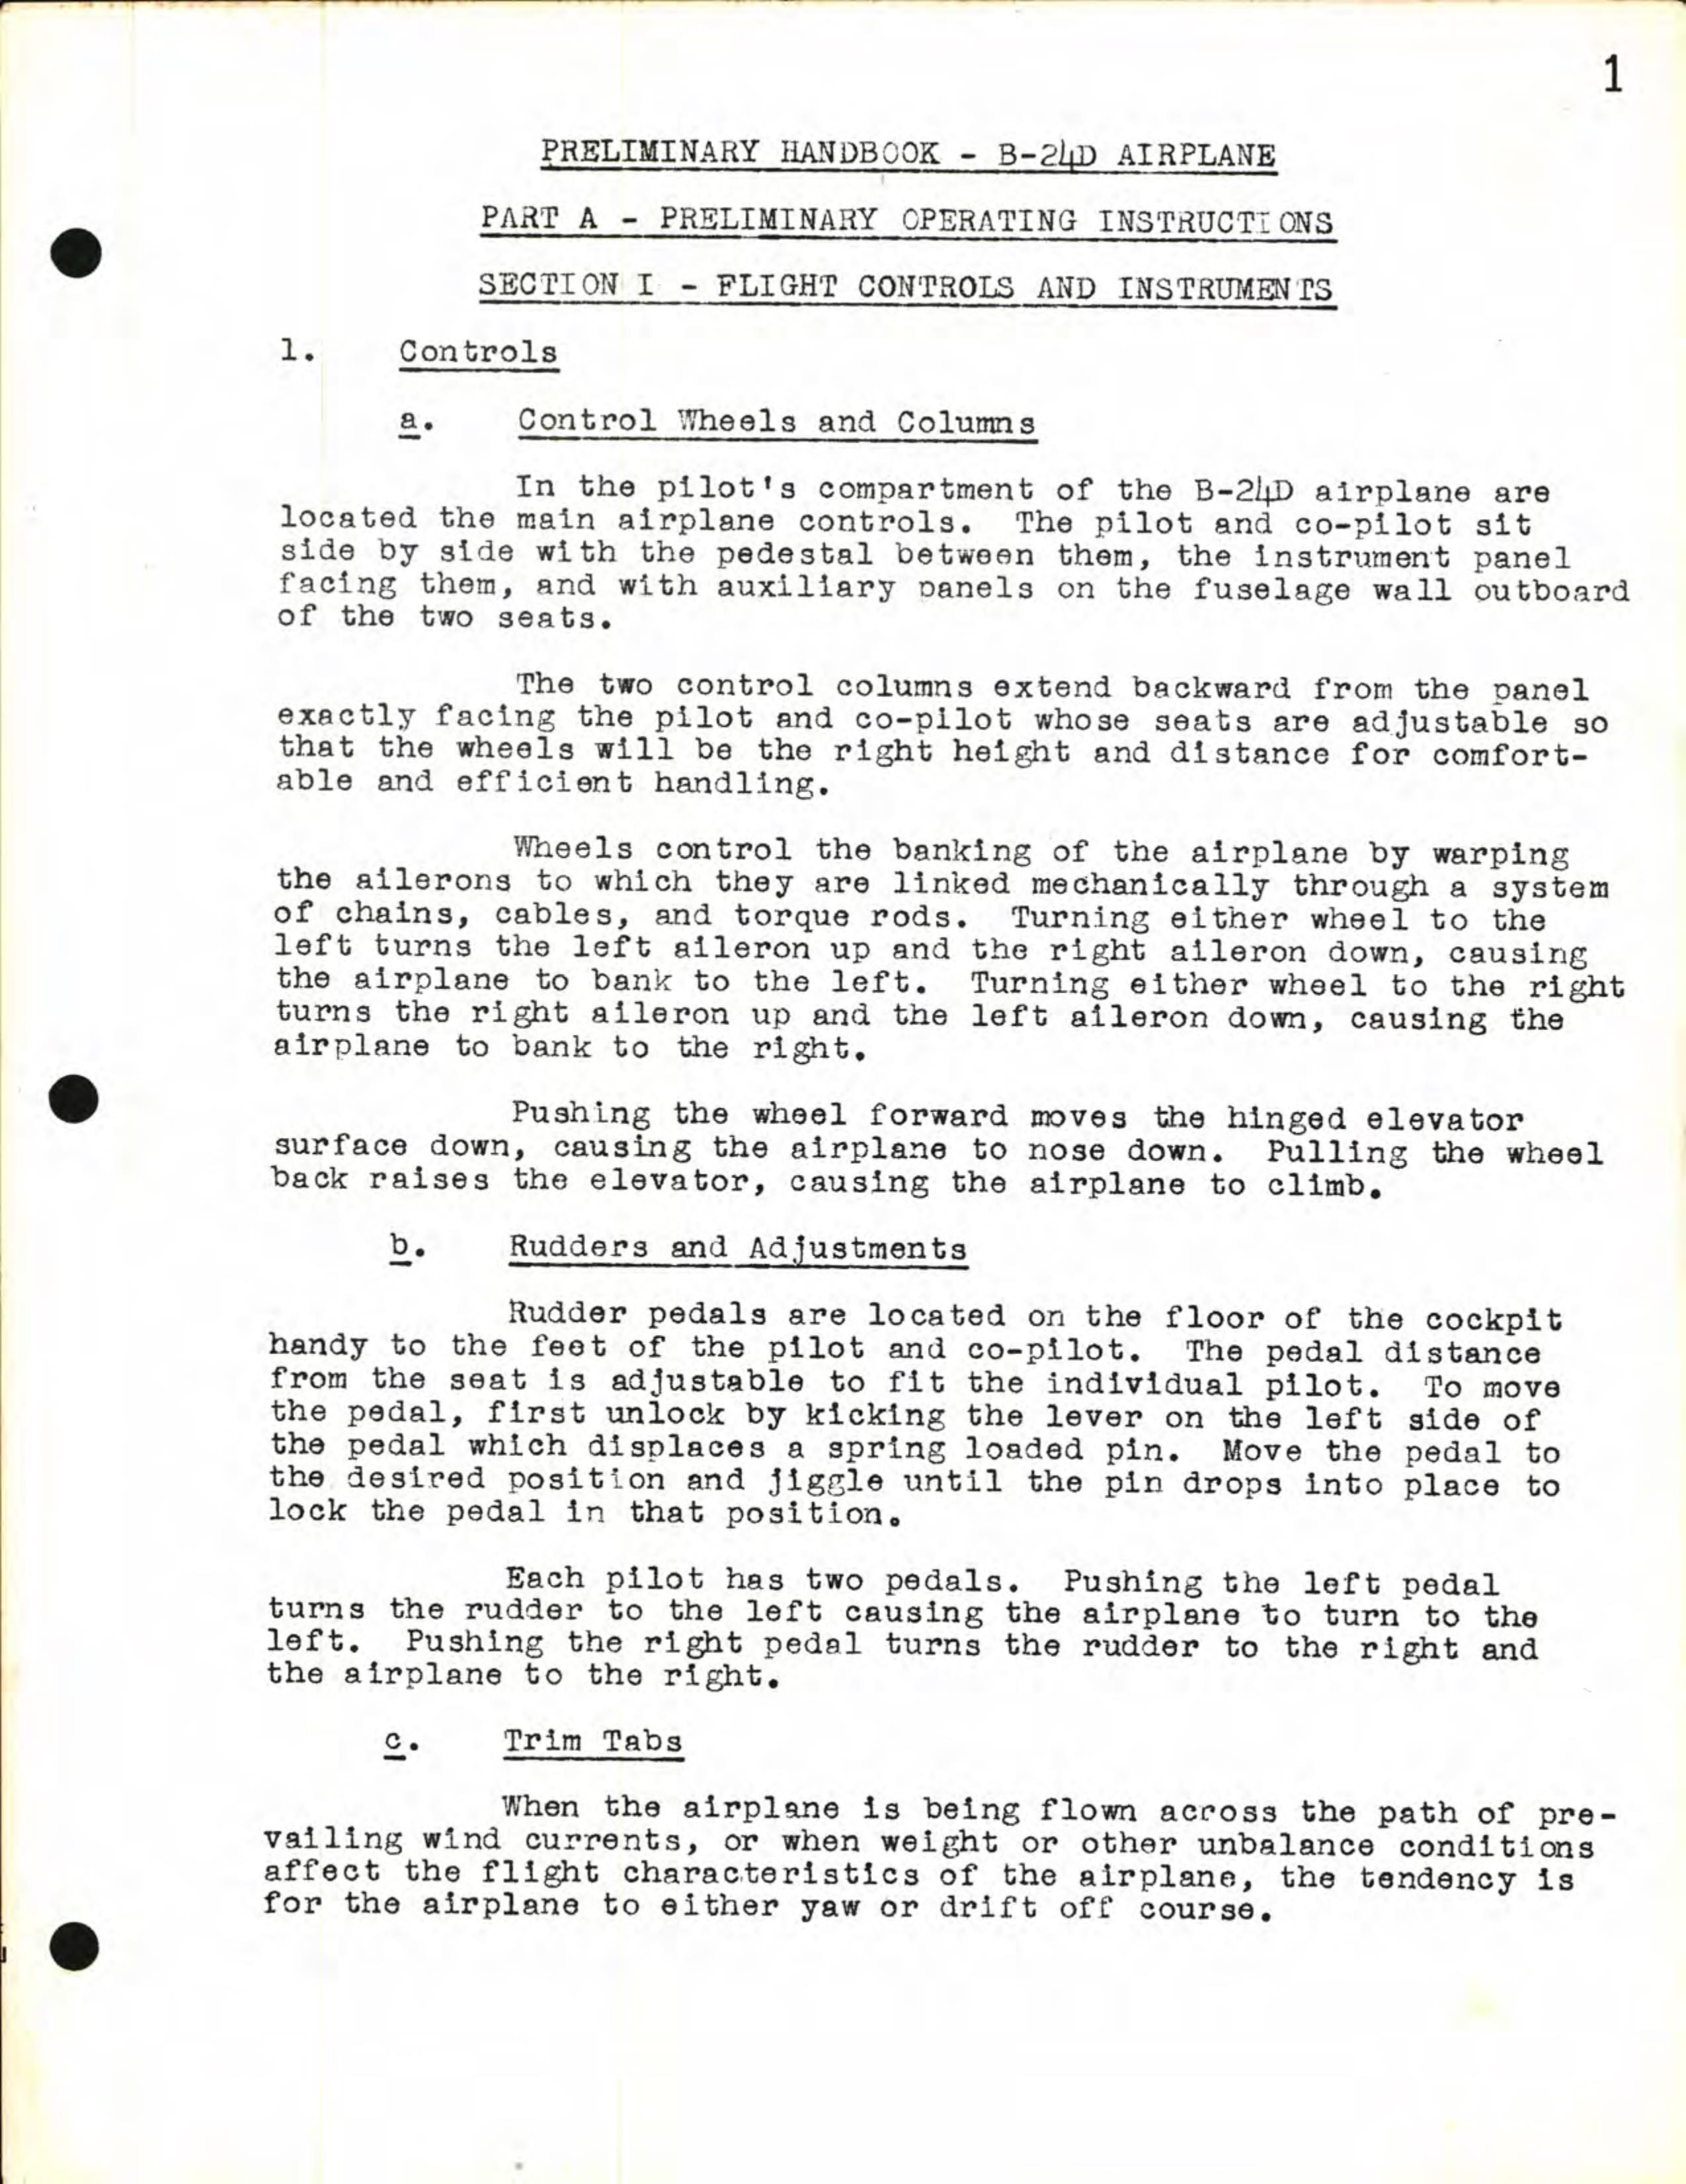 Sample page 11 from AirCorps Library document: Preliminary Handbook of Instructions for the B-24D